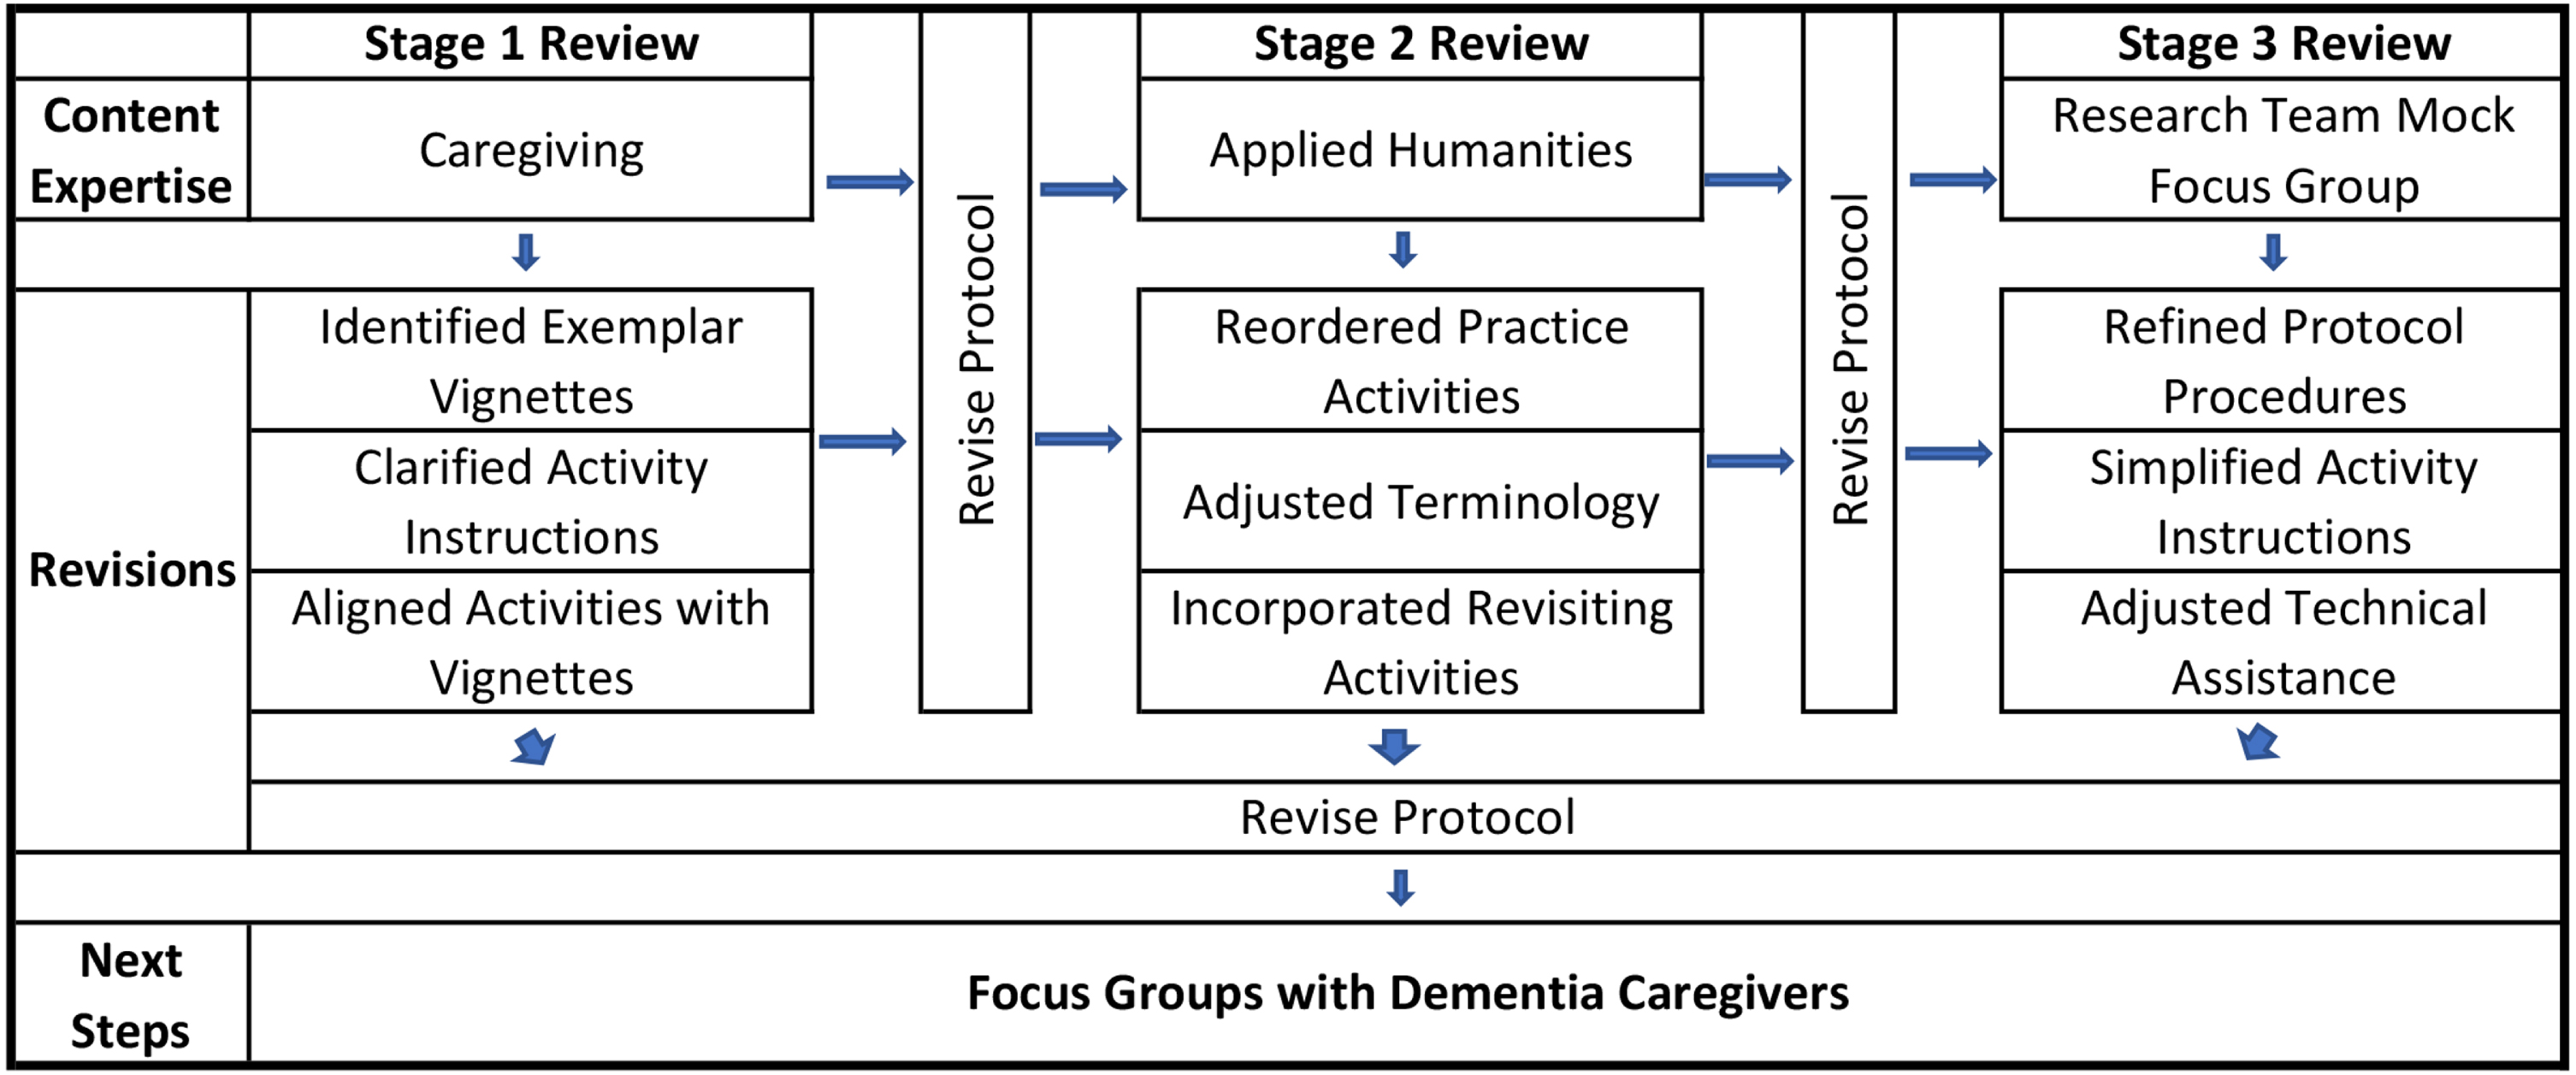 Enhancing Active Caregiver Training (EnACT) three-stage review process and revisions.